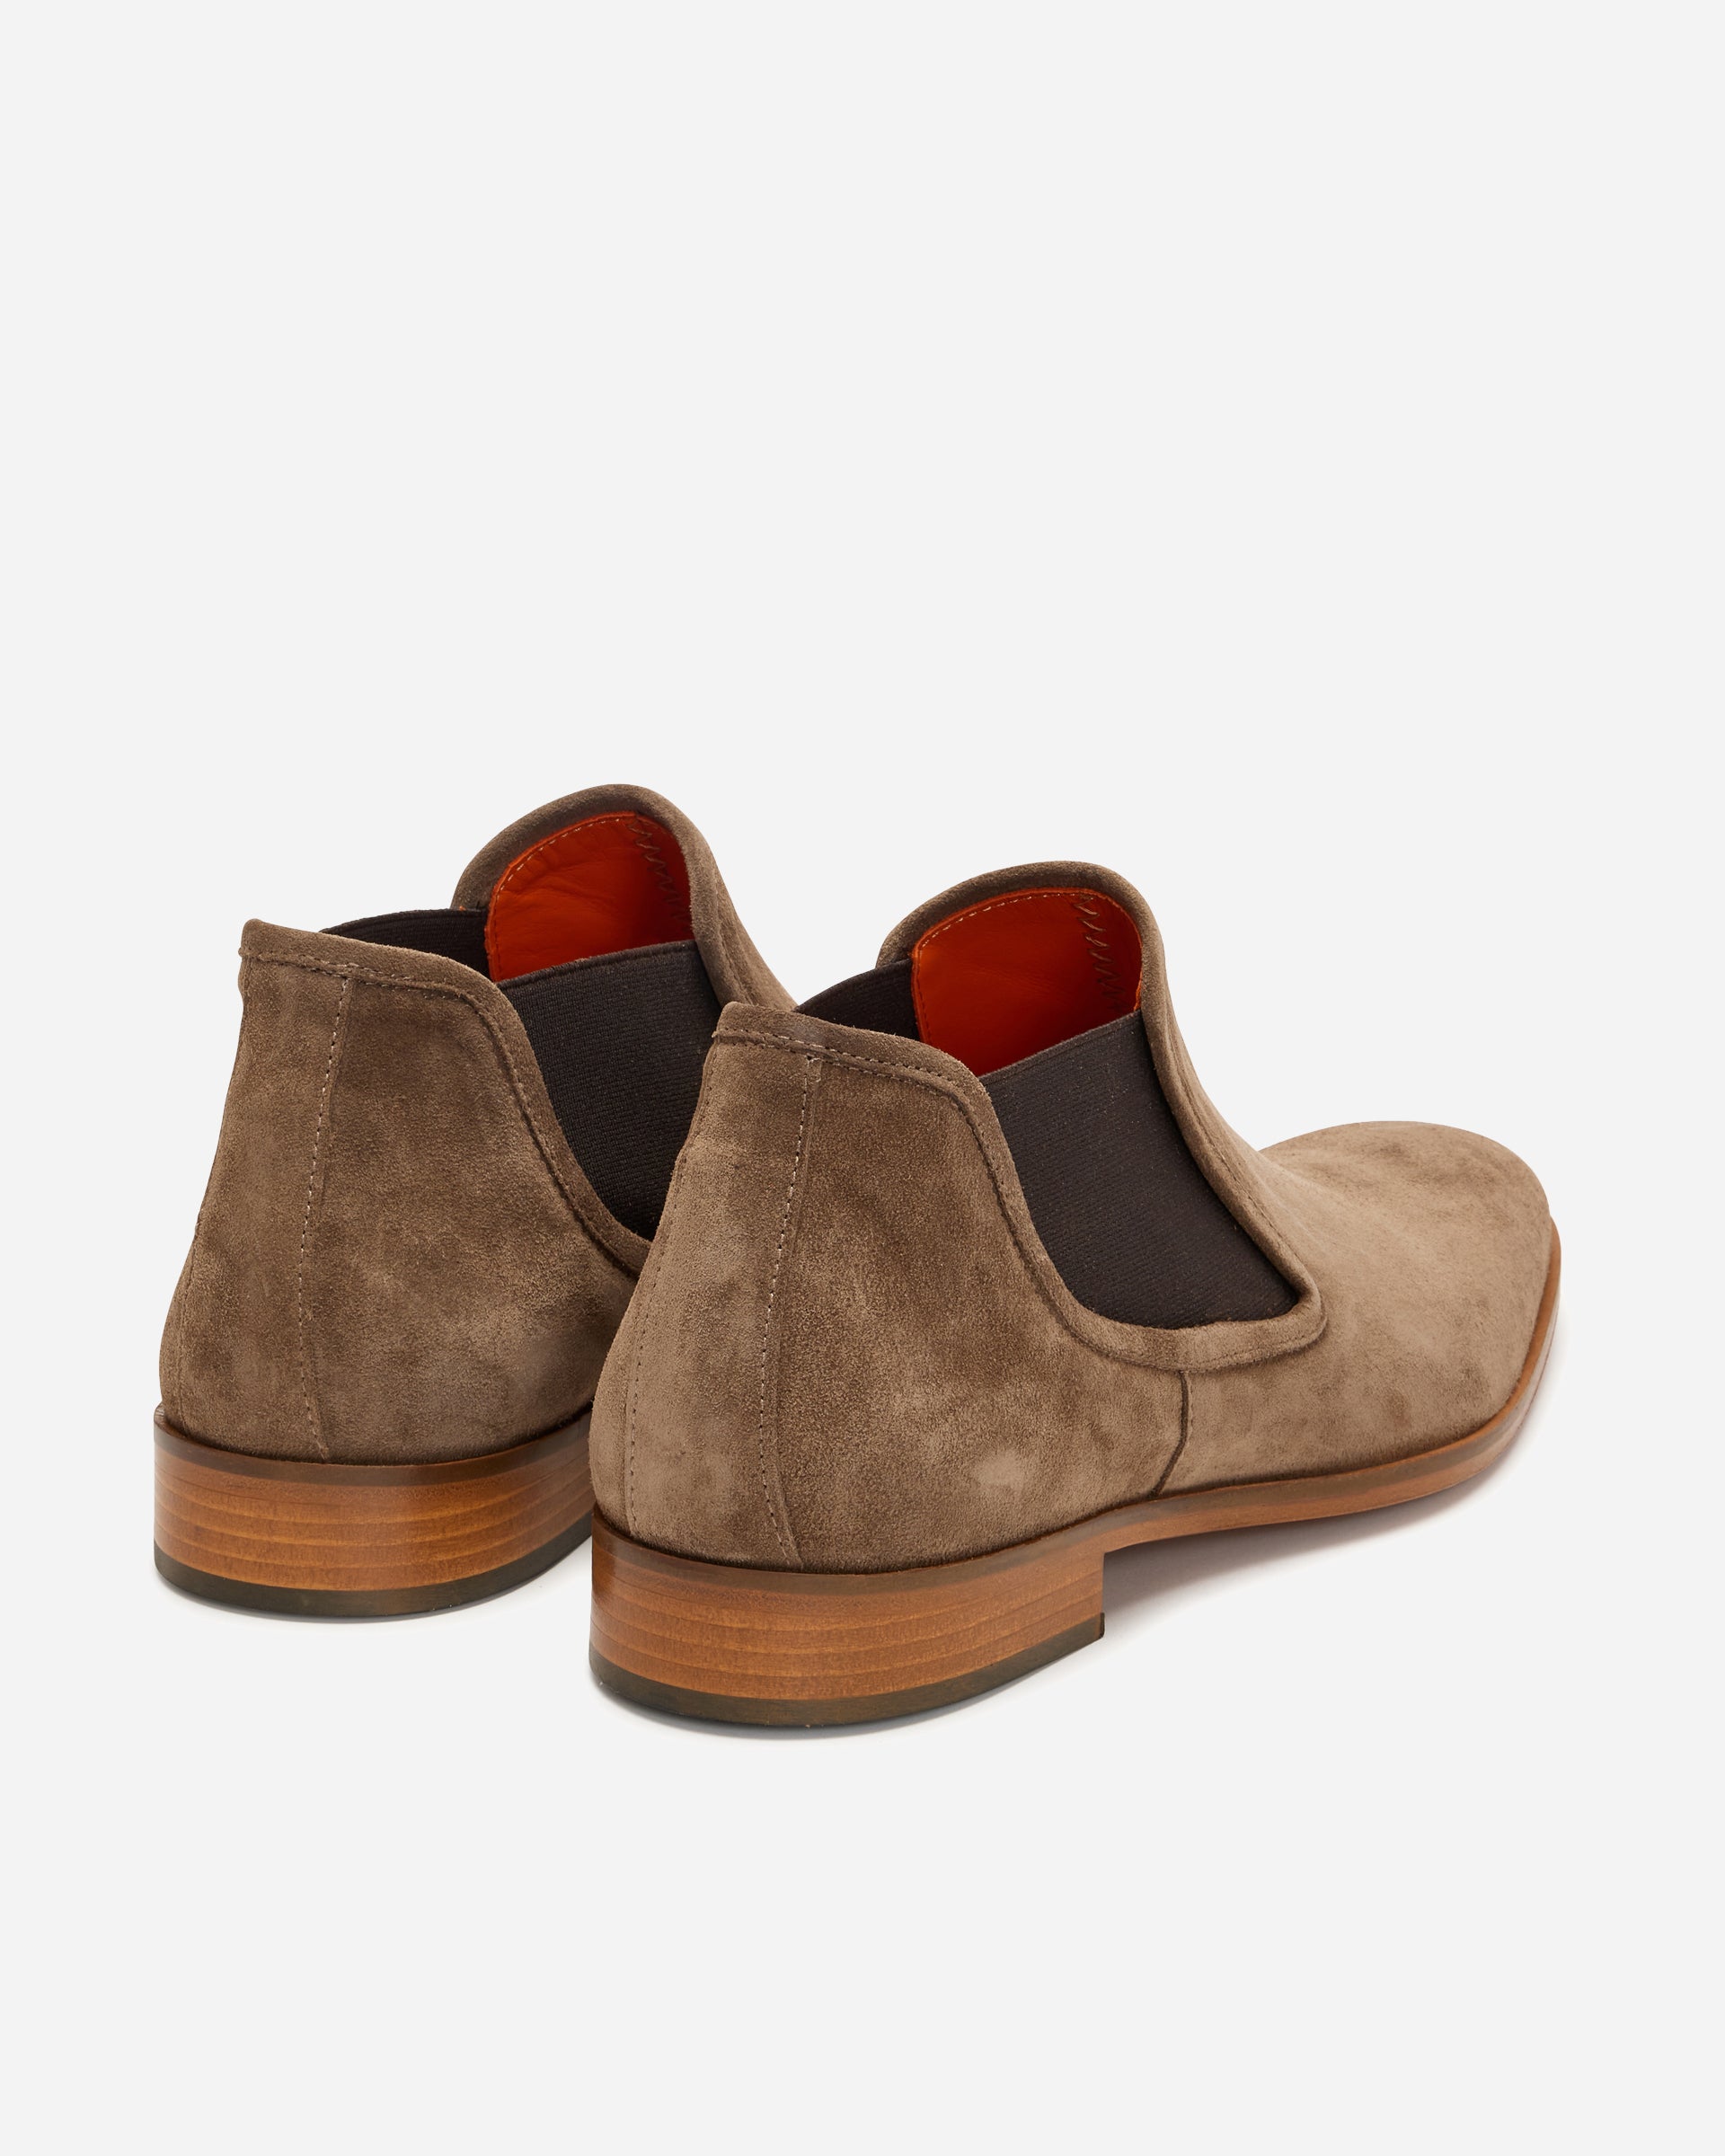 I Maschi Grey Suede Chelsea Boot - Men's Shoes at Menzclub